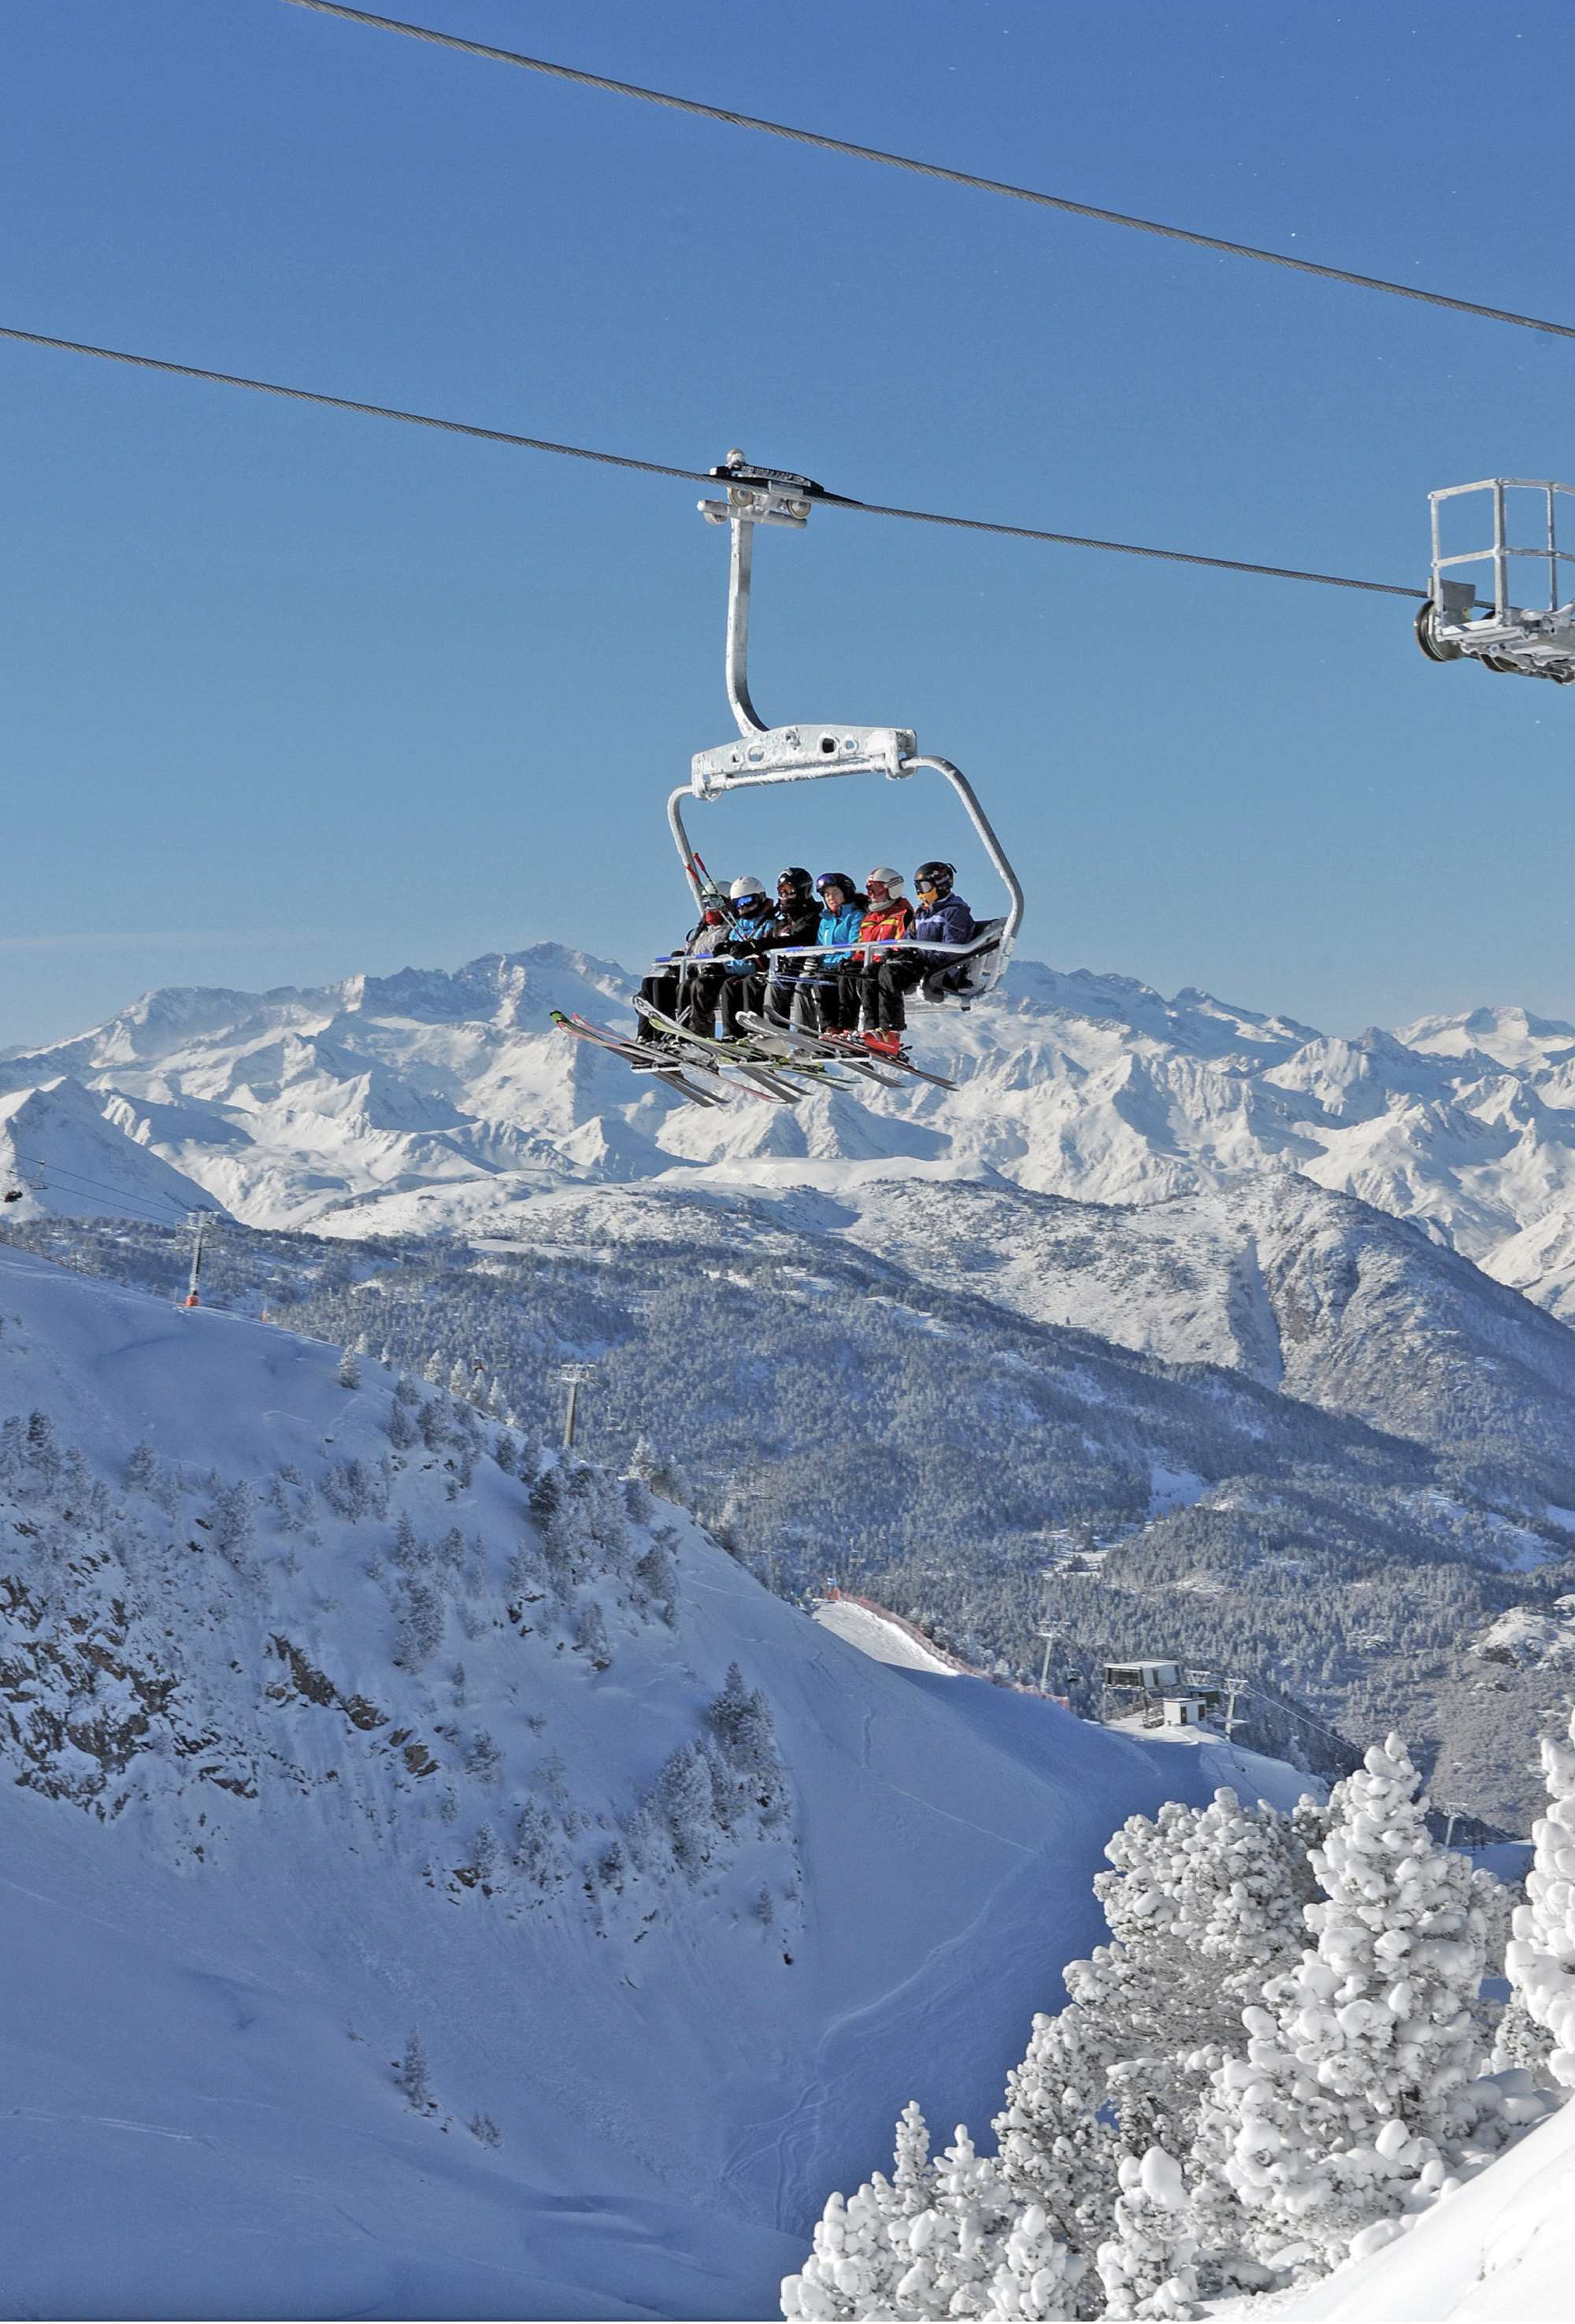 Chairlift in Baqueira